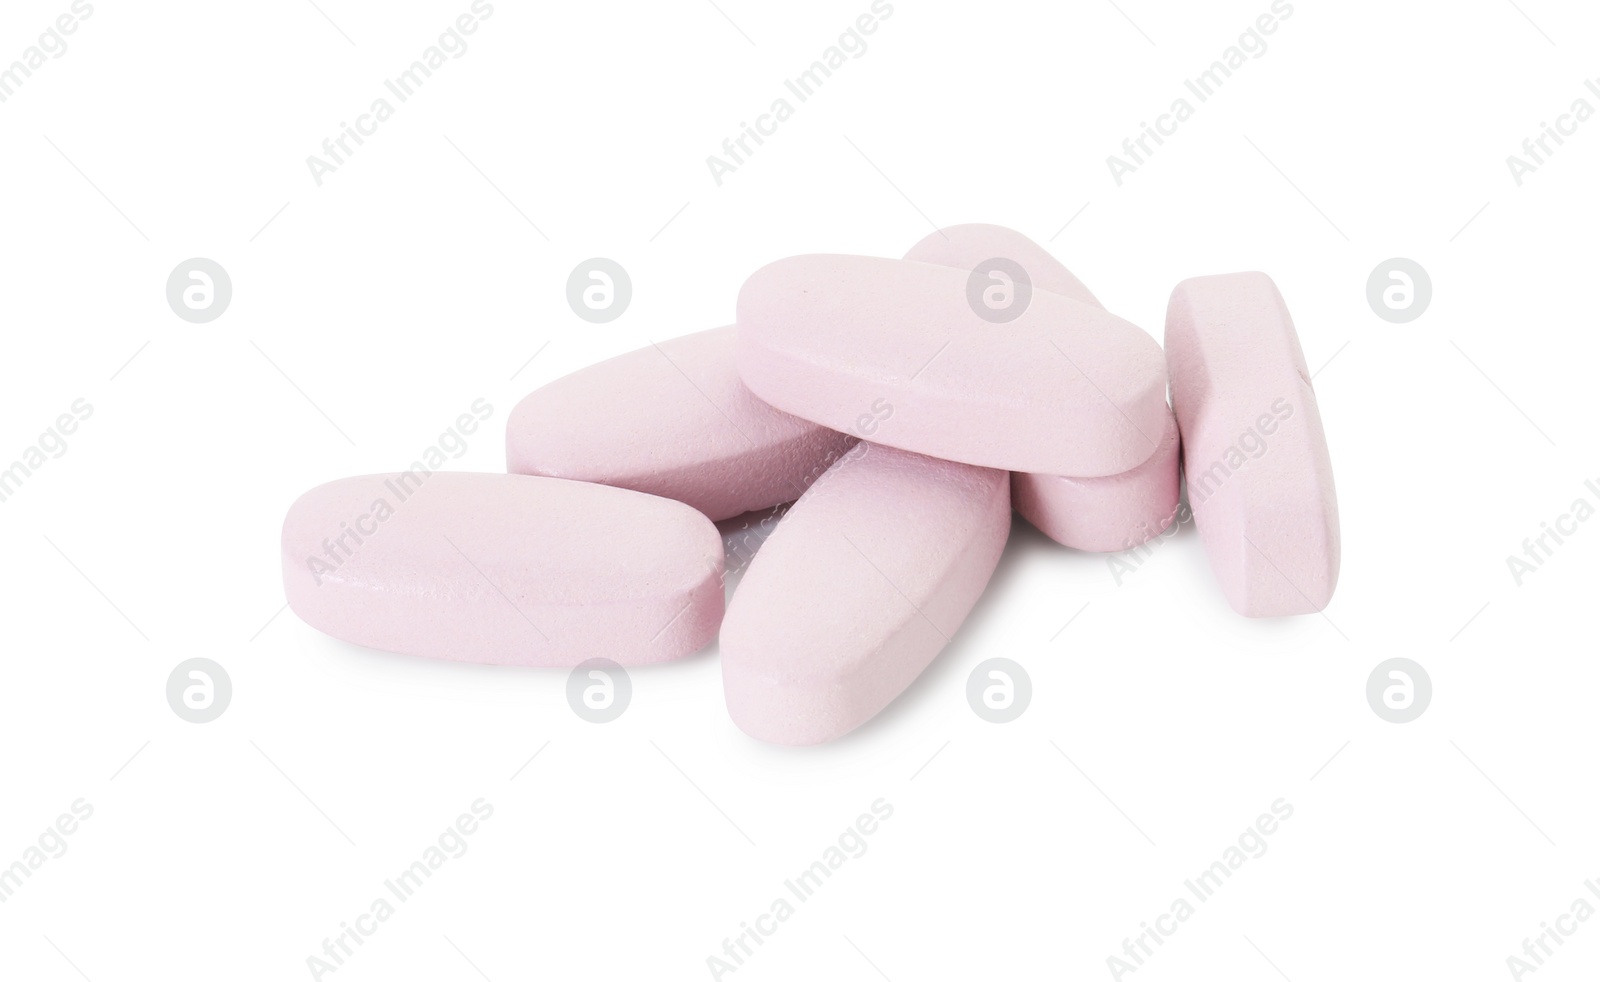 Photo of Vitamin pills isolated on white. Health supplement